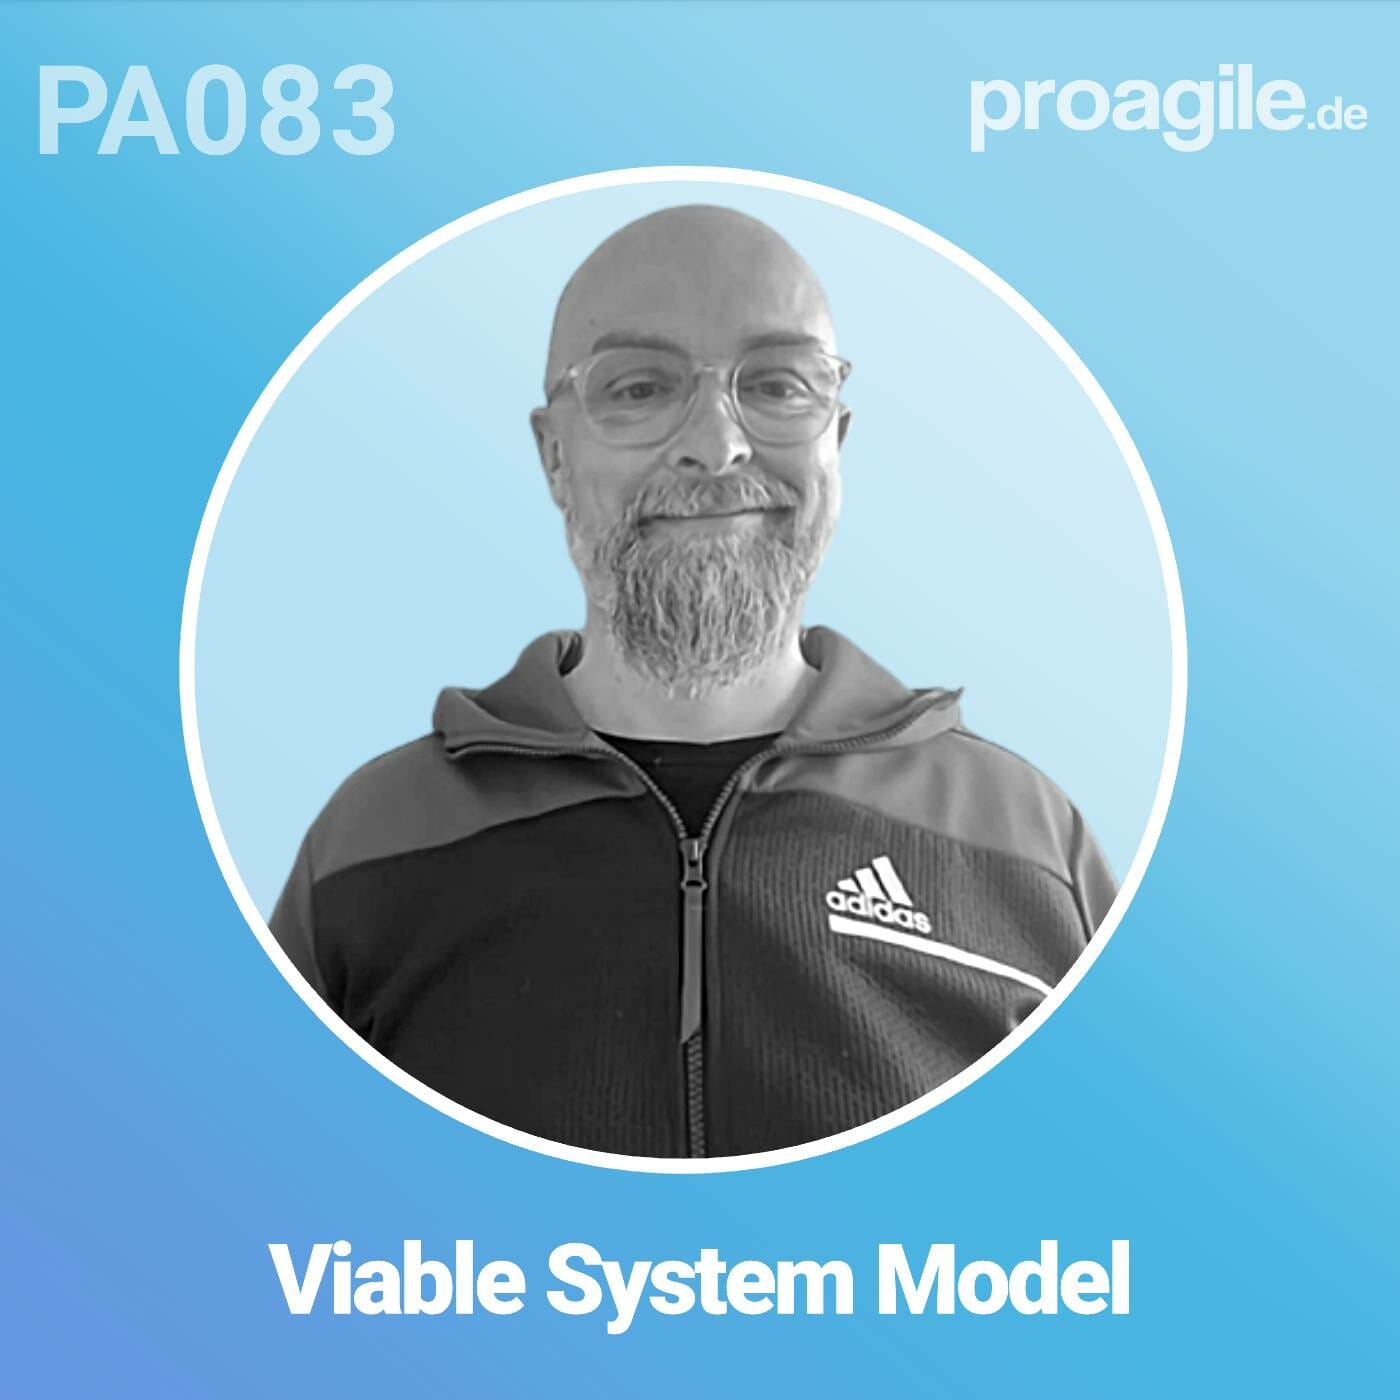 PA083 Viable System Model